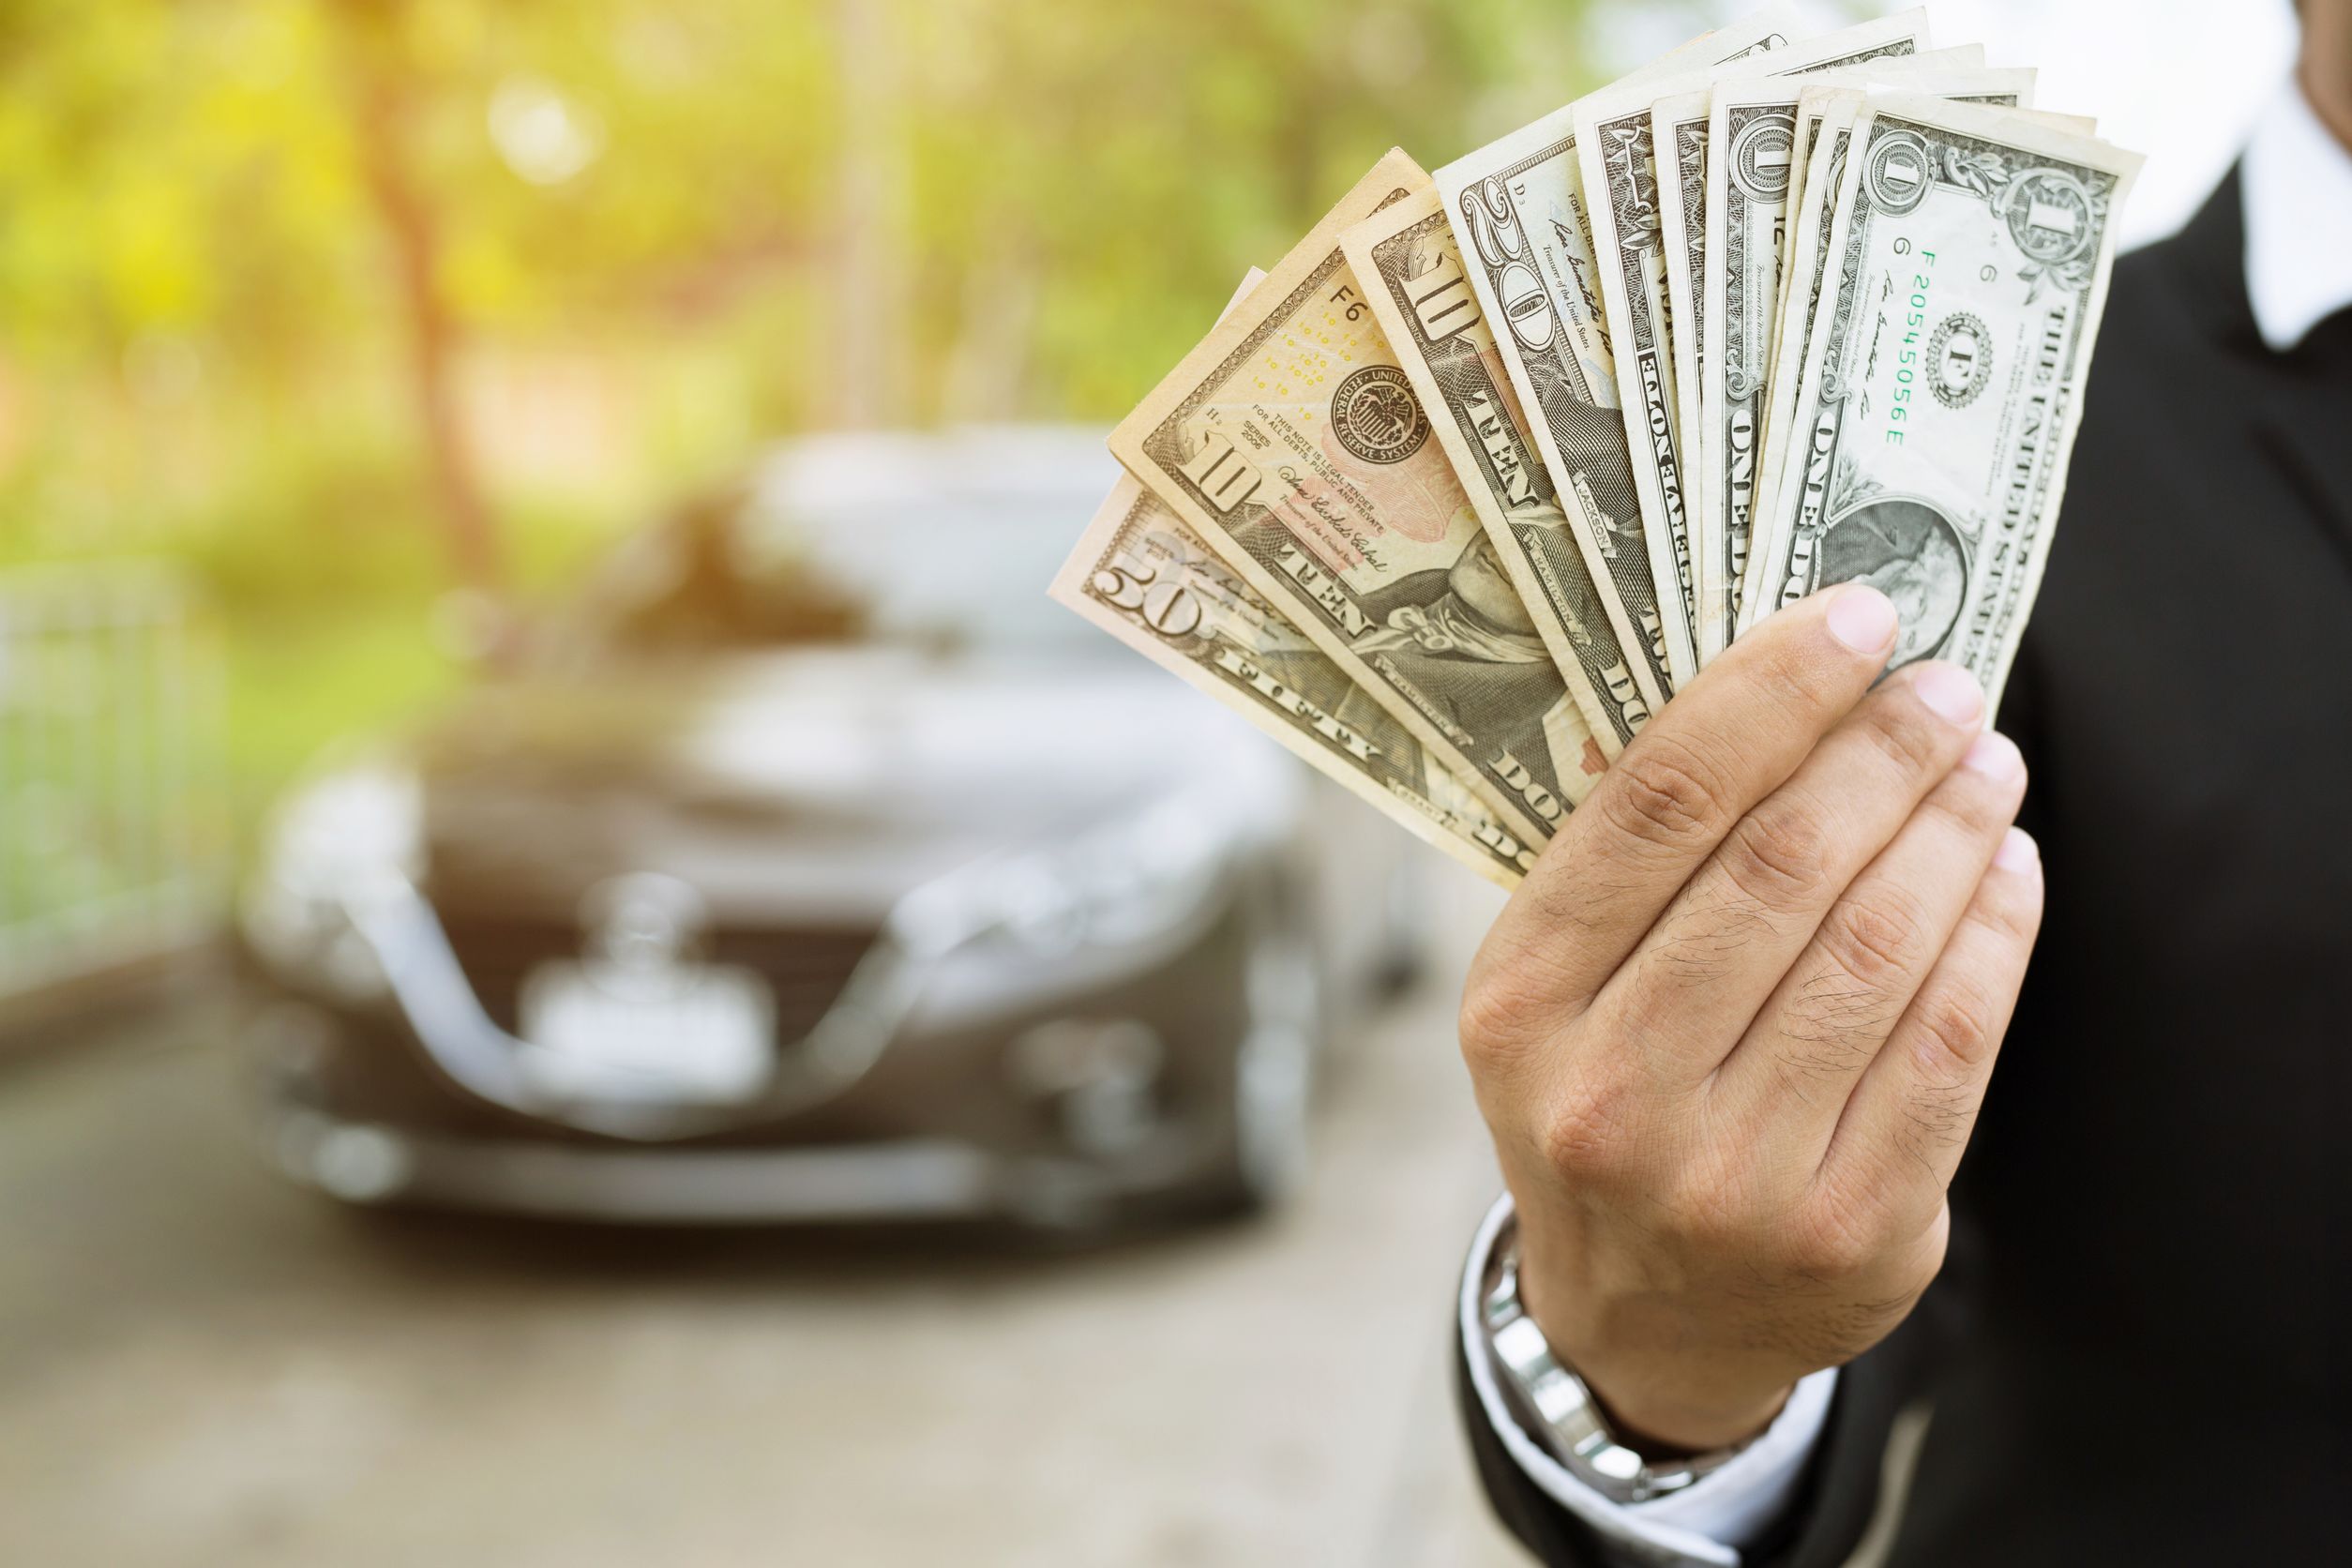 How to Find the Right Car Title Loan Online Provider?